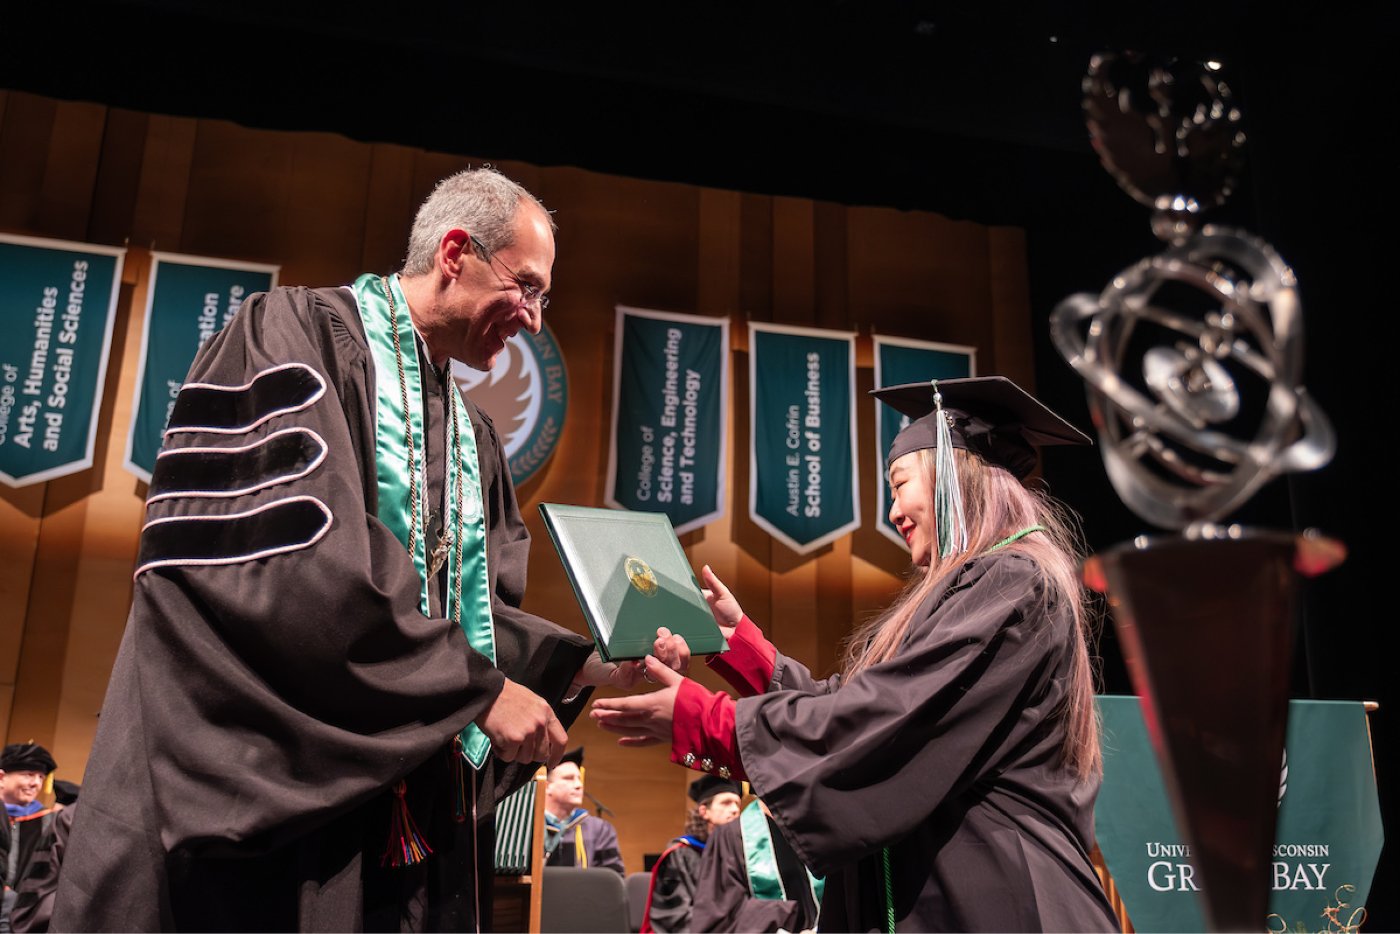 A student receives their diploma from the Chancellor